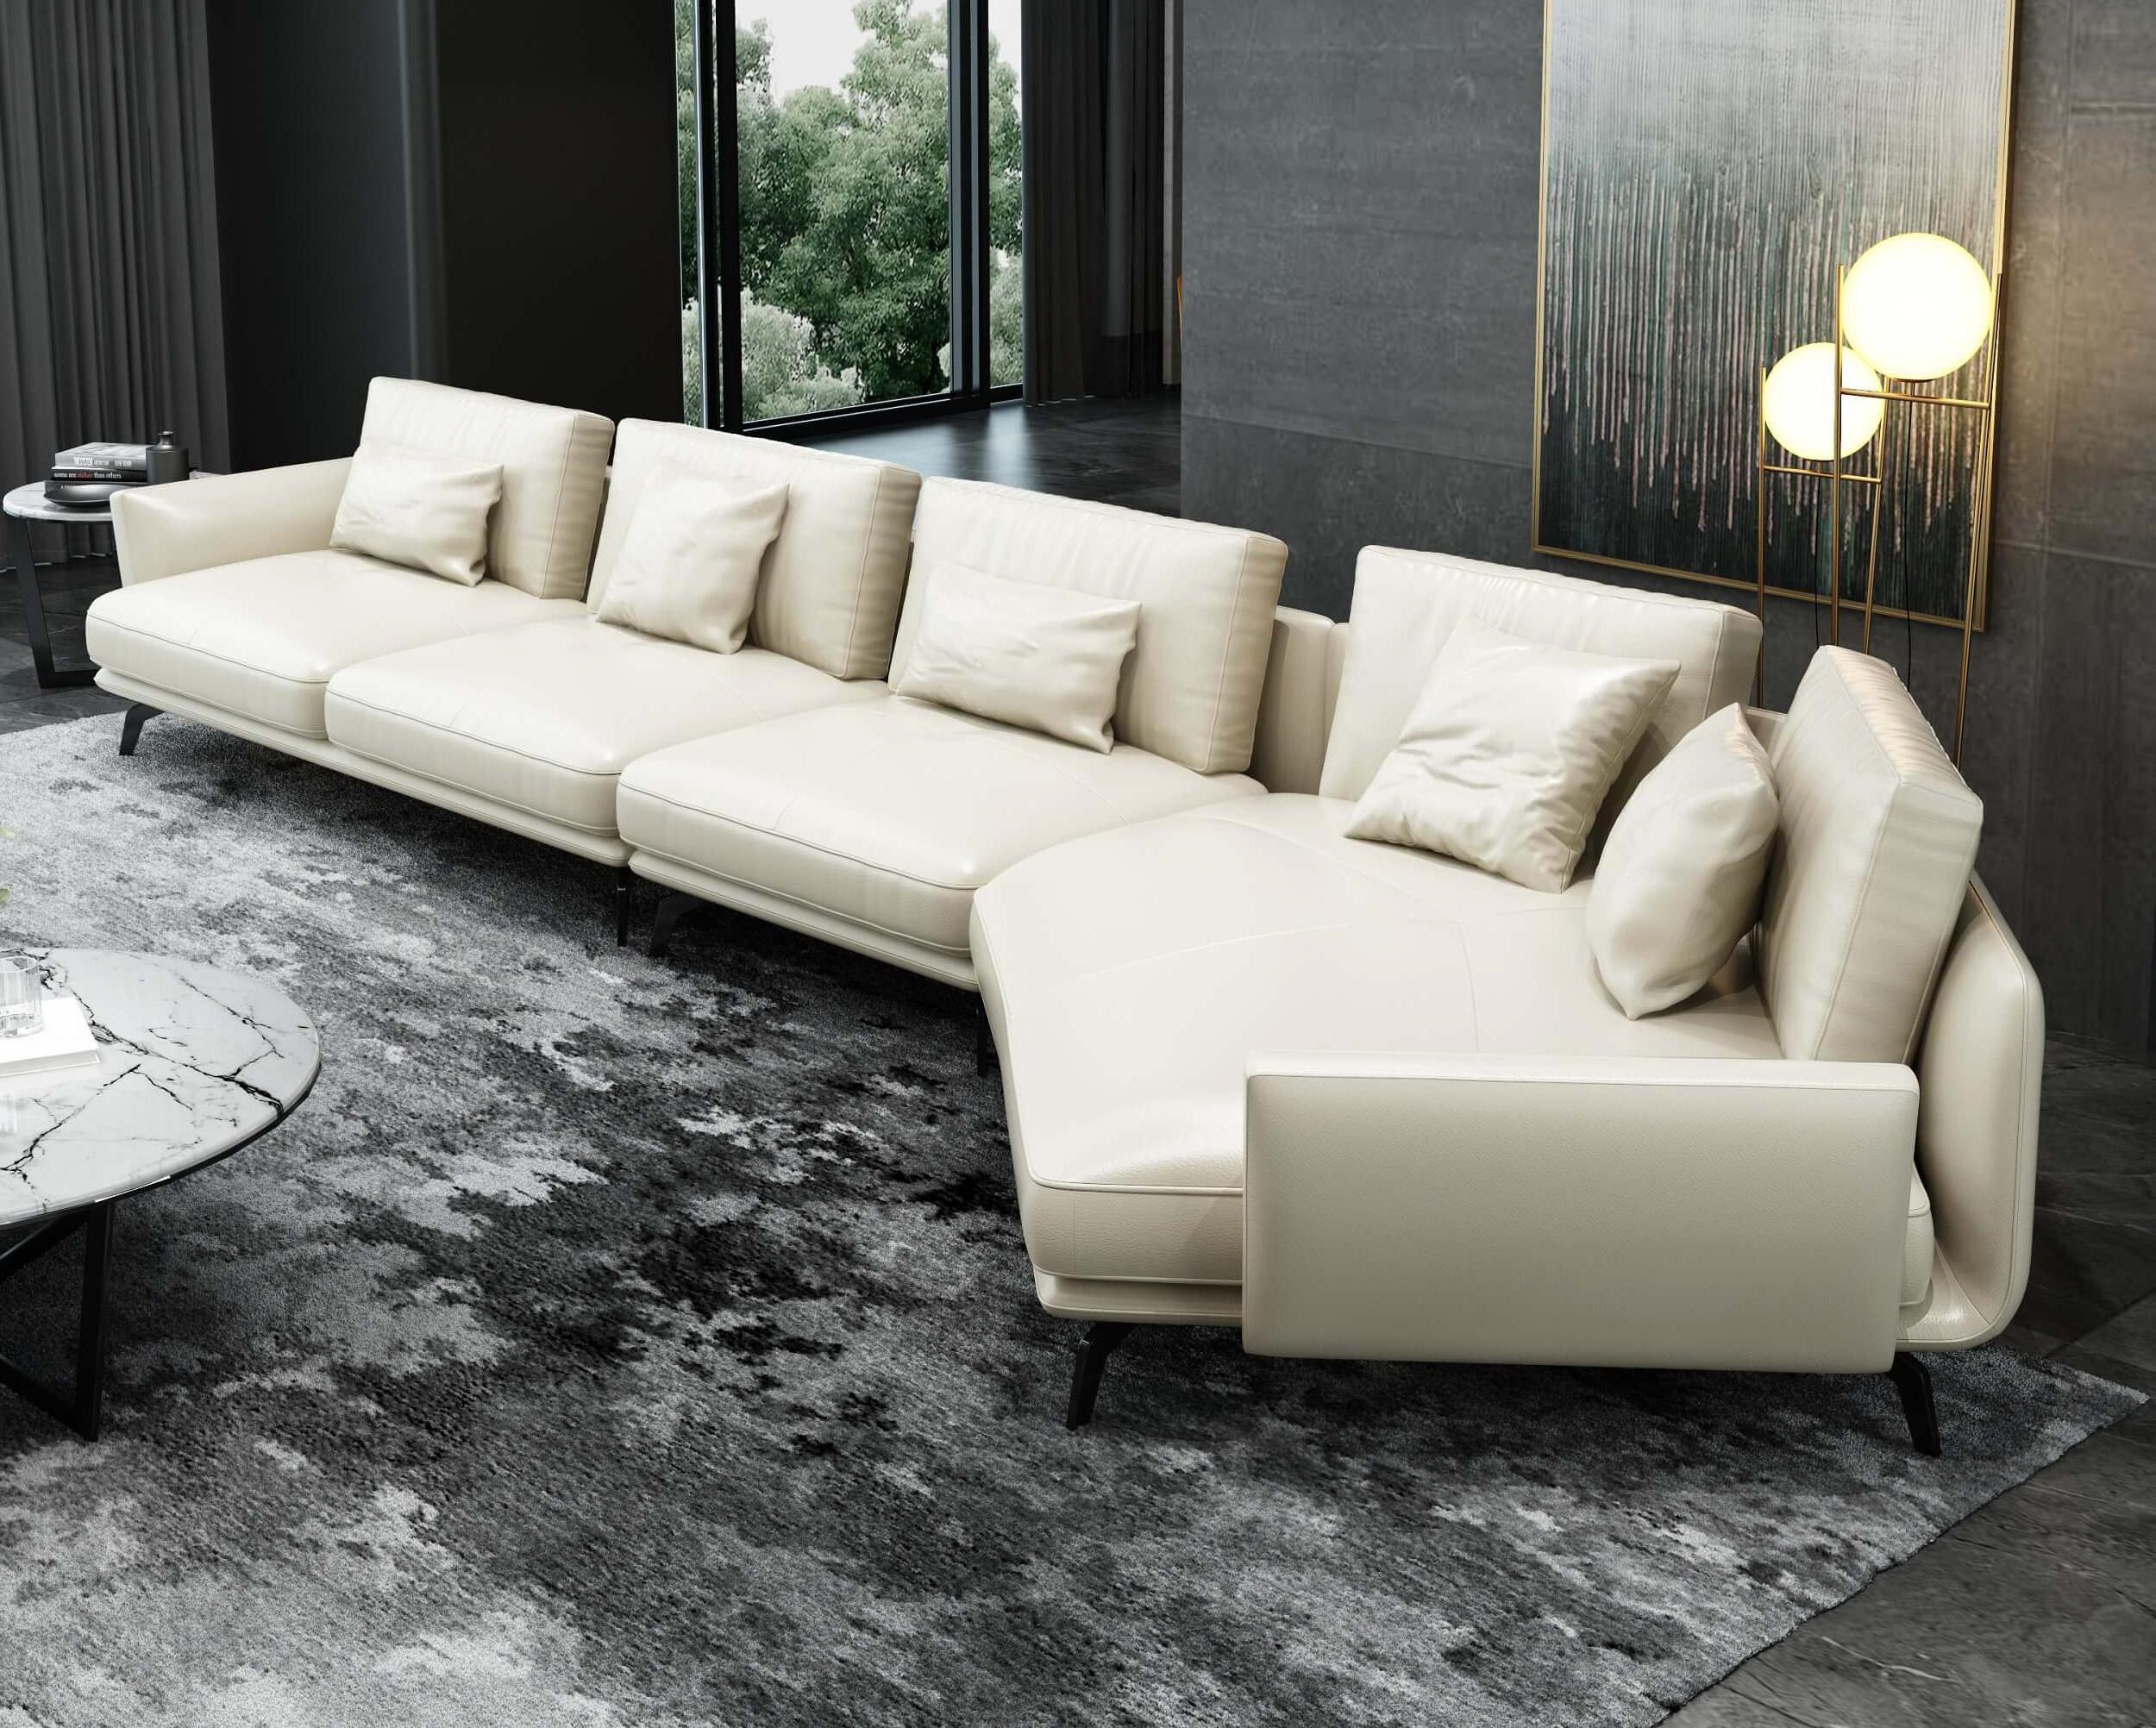 

    
Off White Italian Leather 5-Seater Sectional GALAXY RHC EUROPEAN FURNITURE
